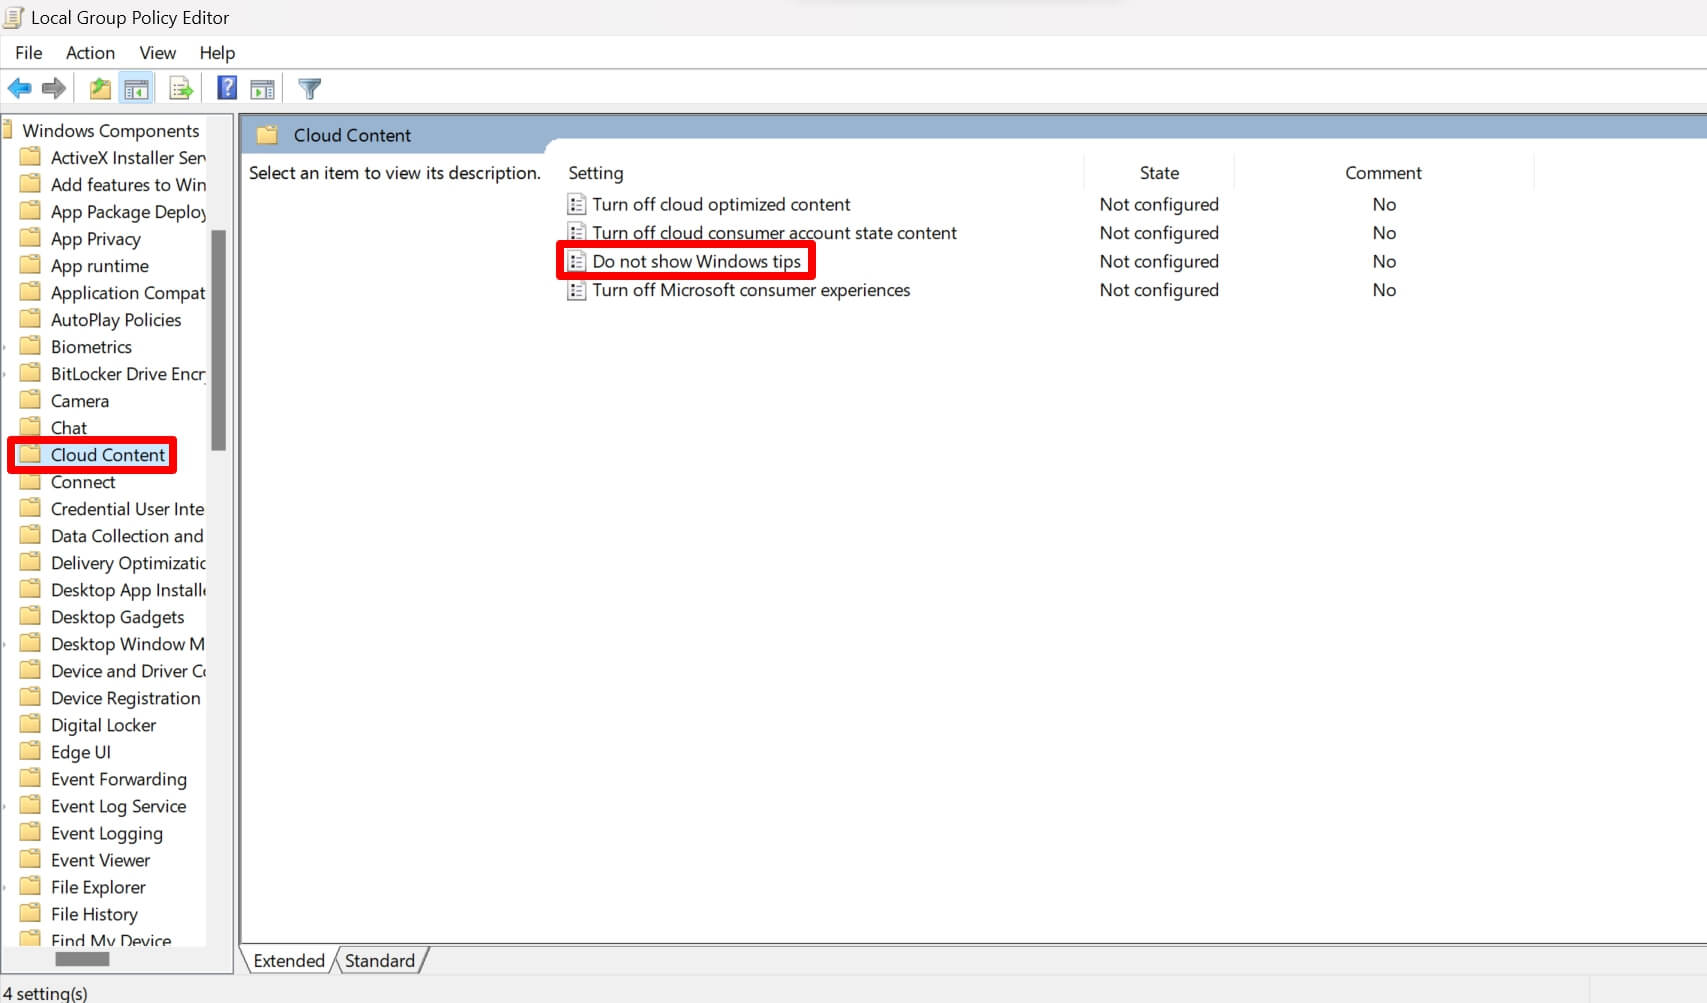 Access cloud content within group policy editor